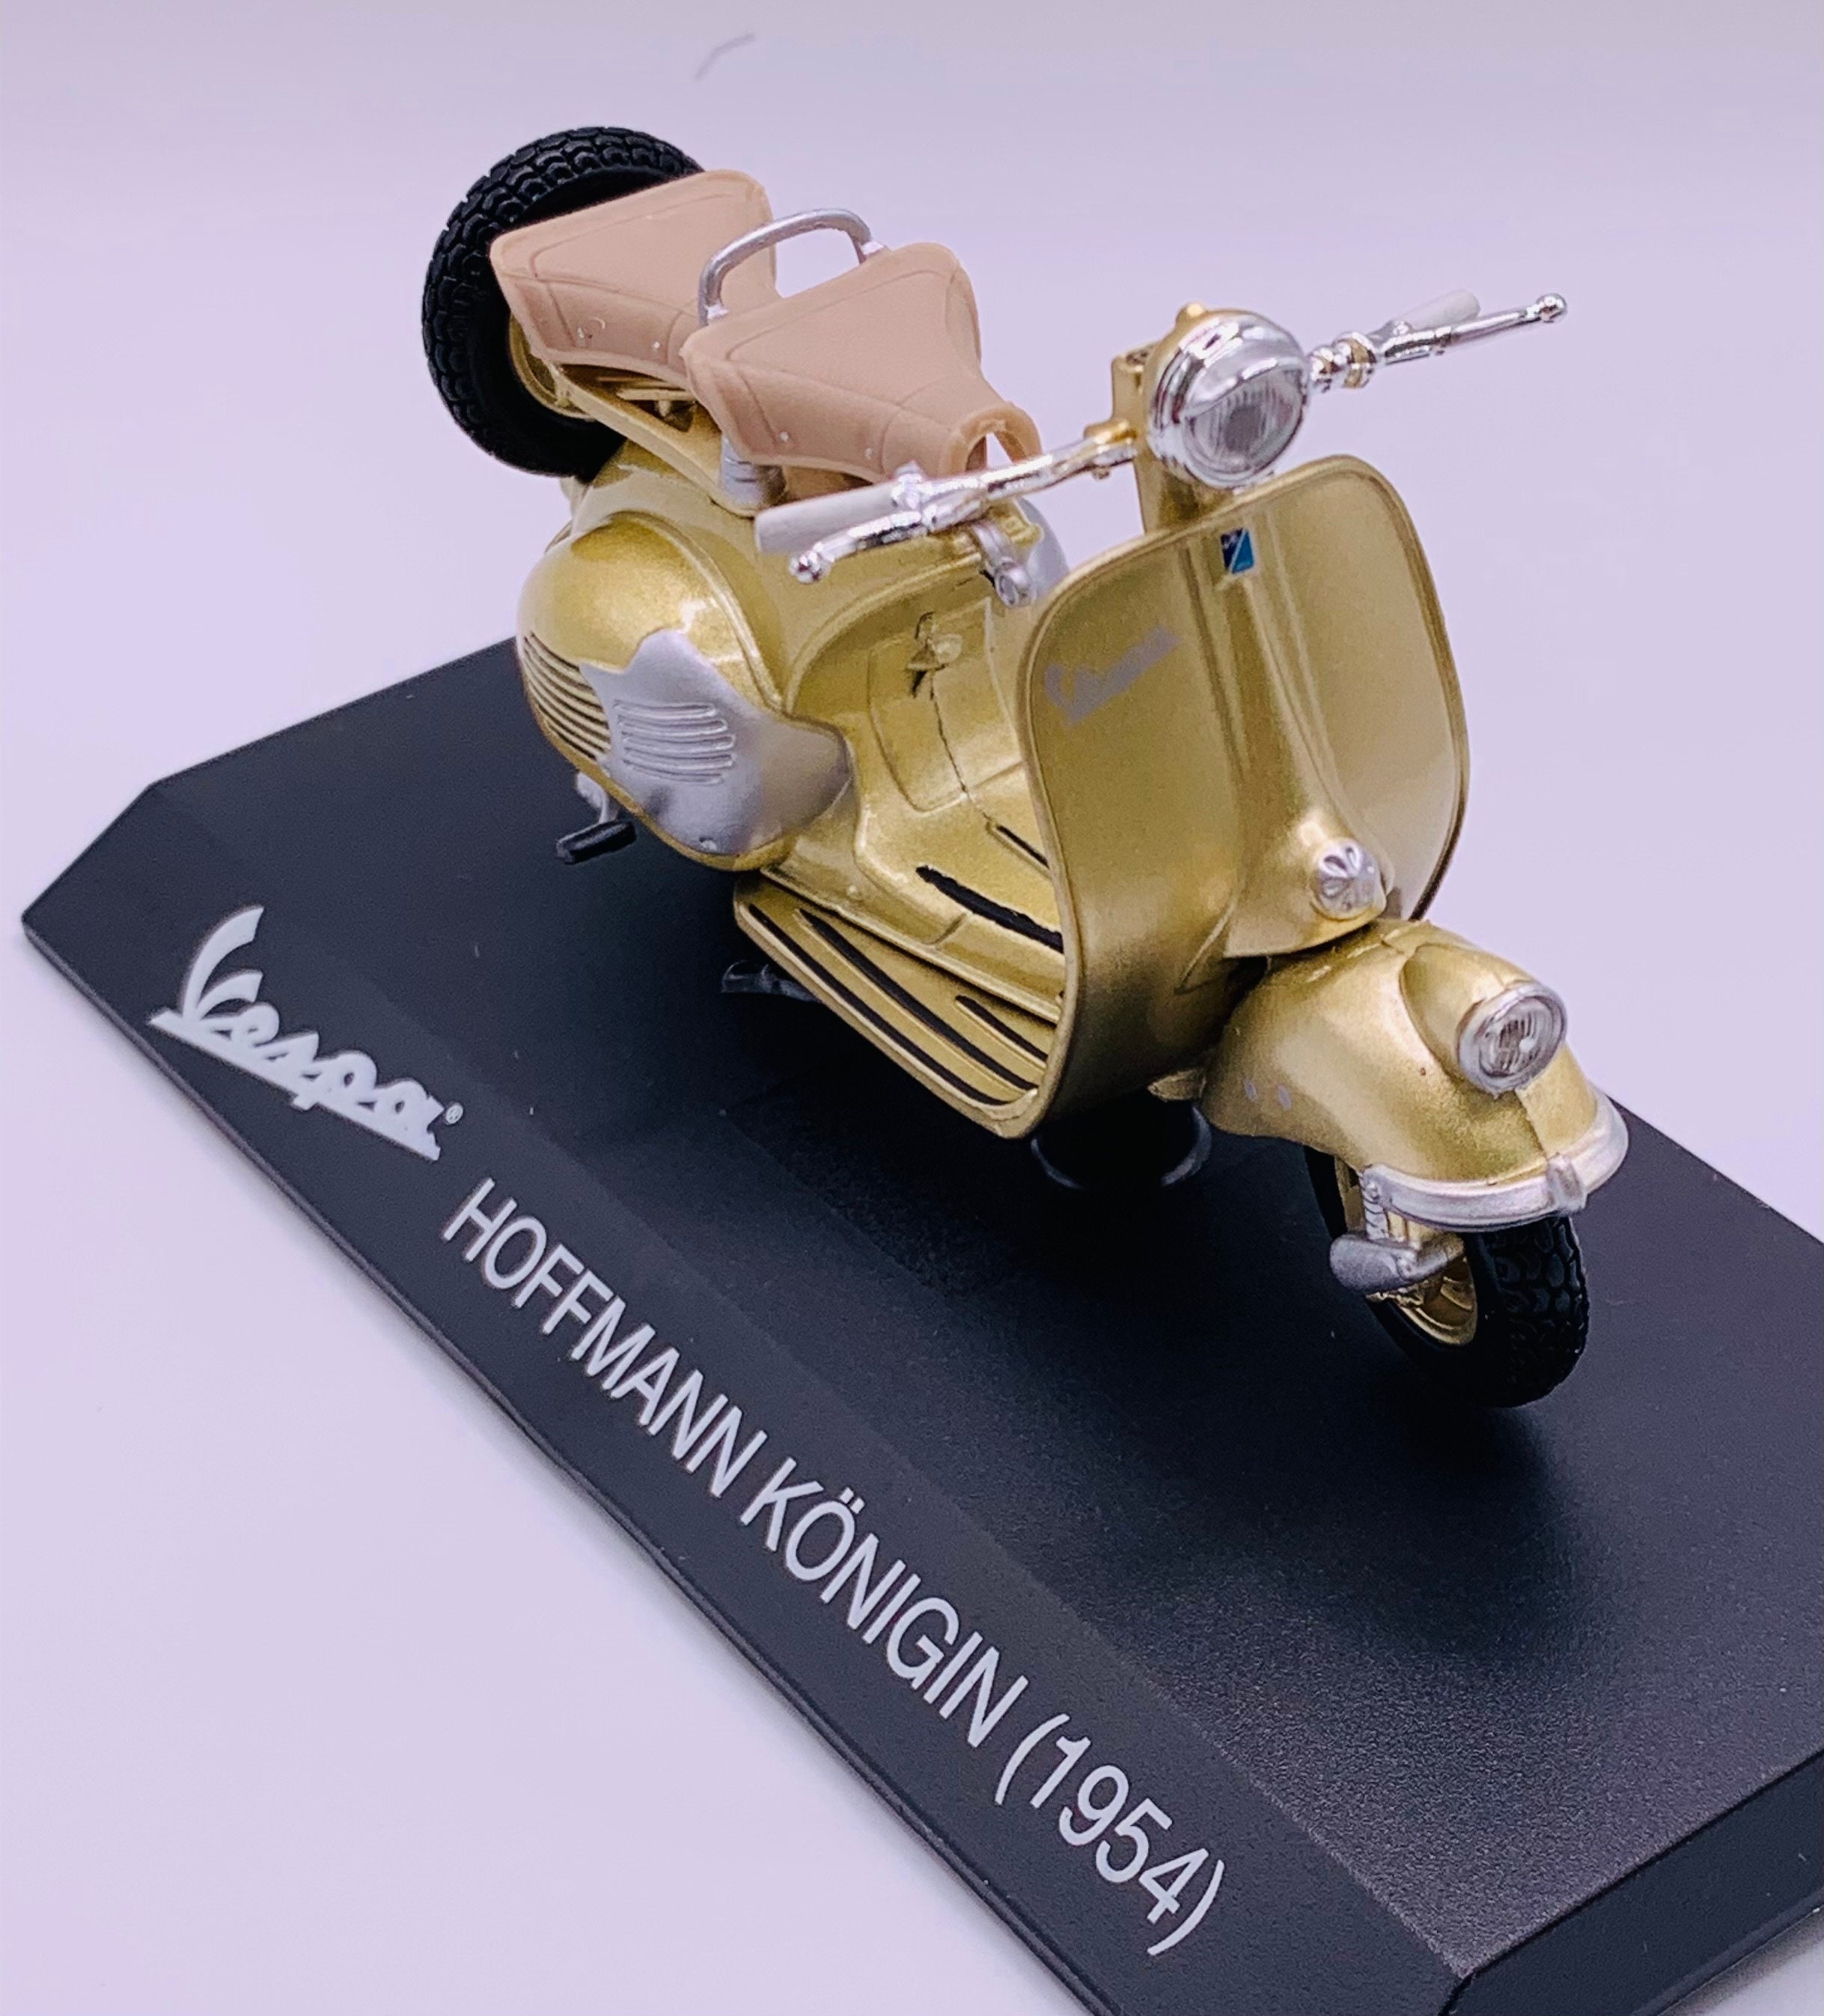 Vintage Vespa Scooter Motorcycle Iron Model Handmade Toy Collection  Decoration